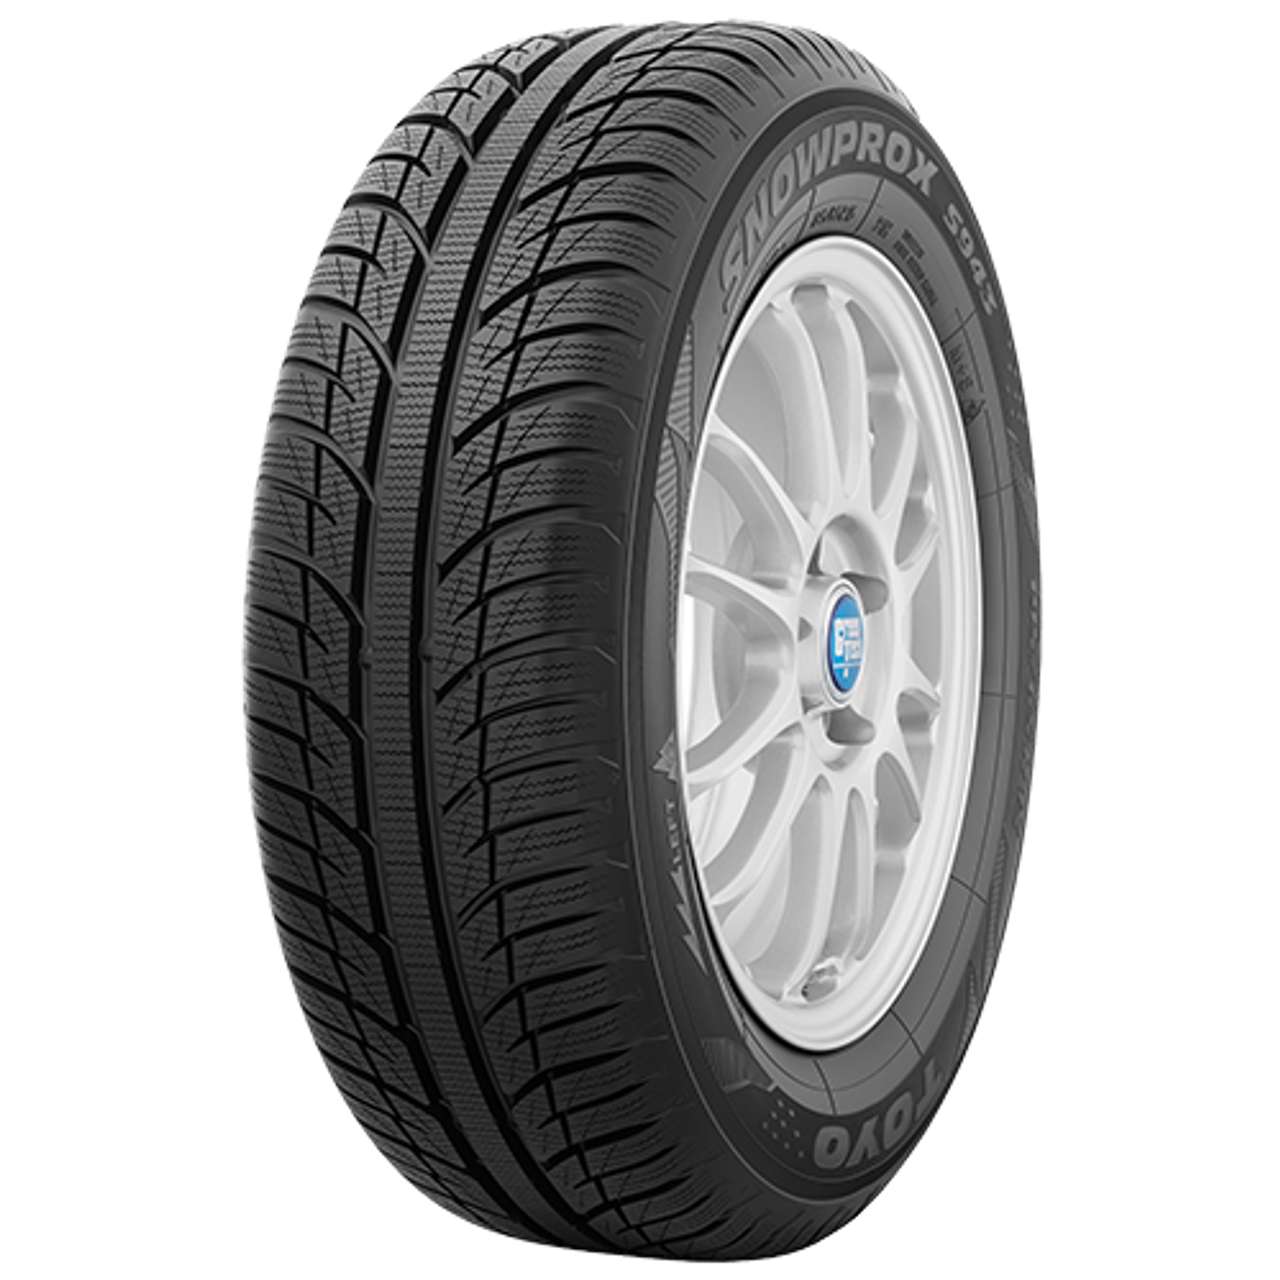 TOYO SNOWPROX S943 165/70R14 85T BSW